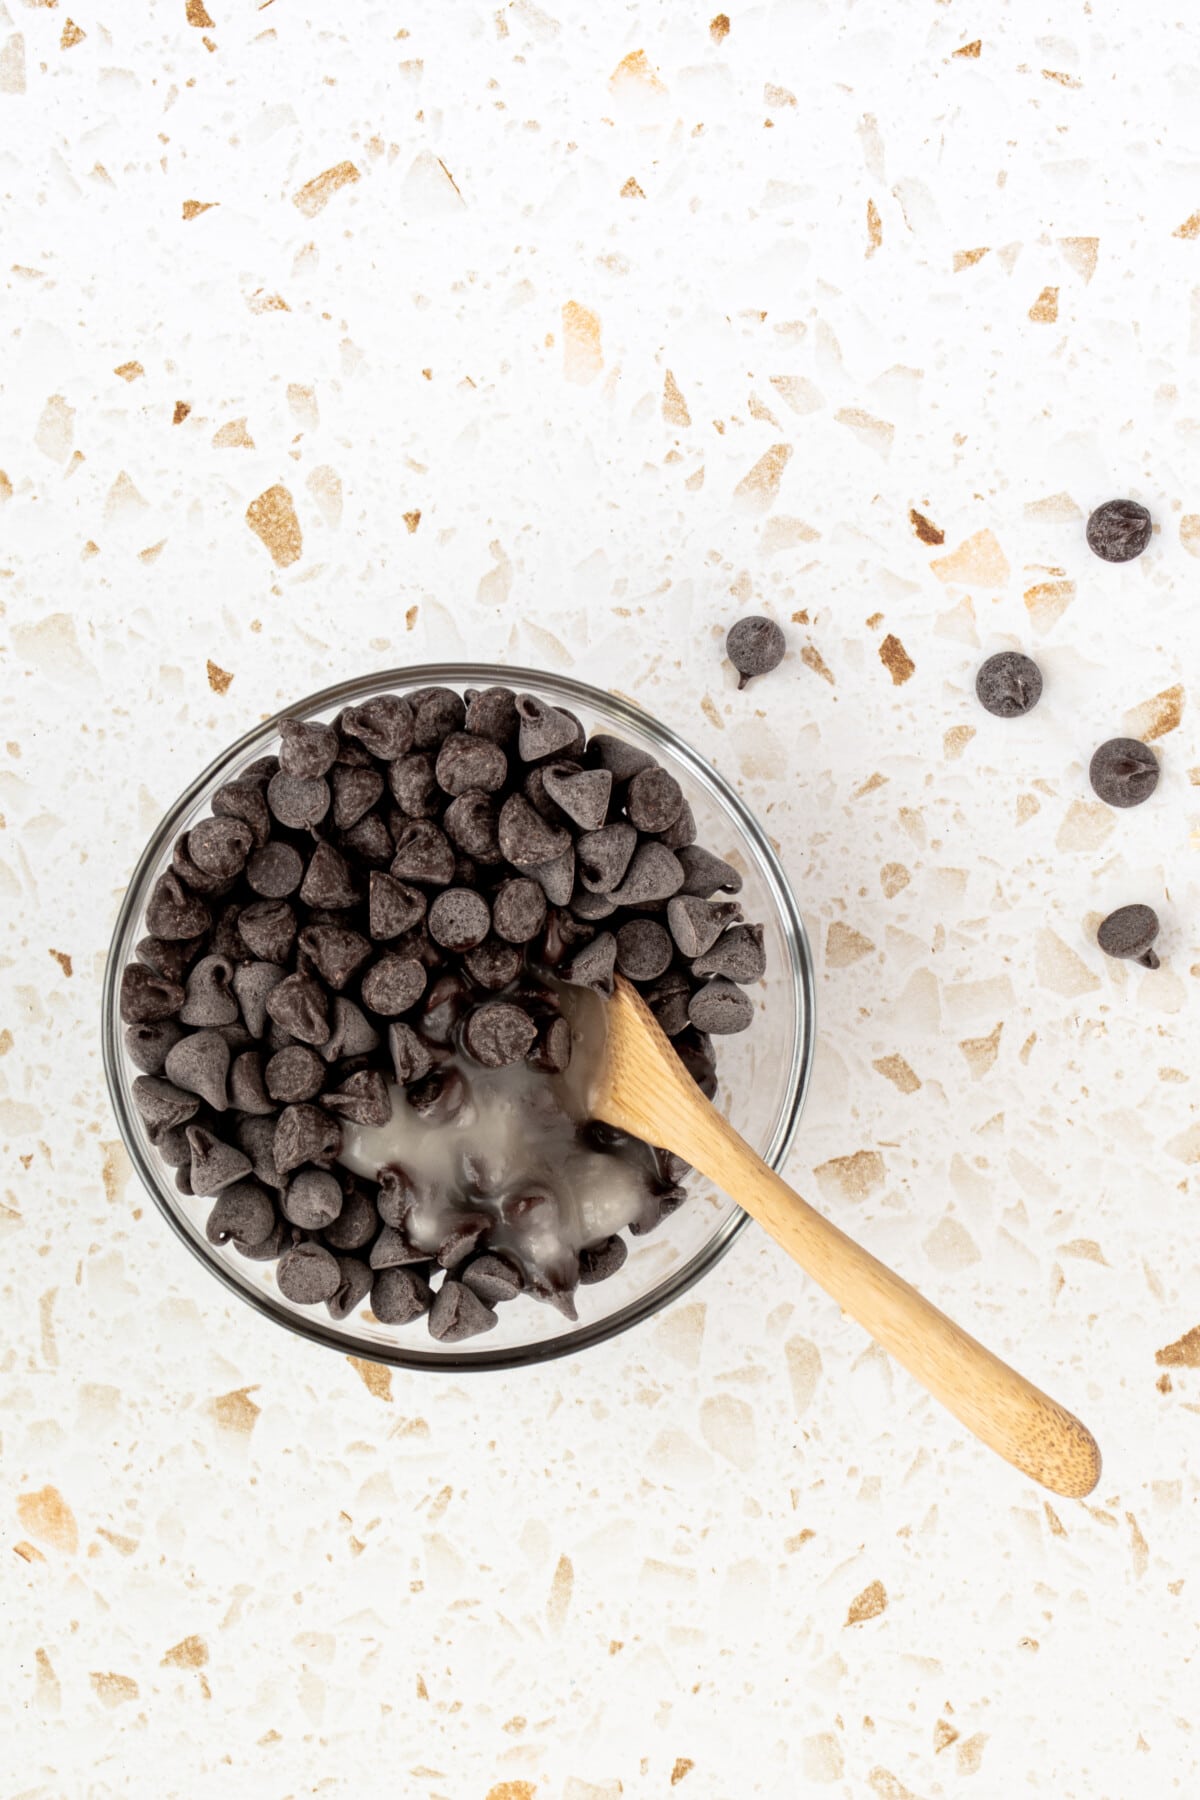 Spoon in a bowl of chocolate chips.